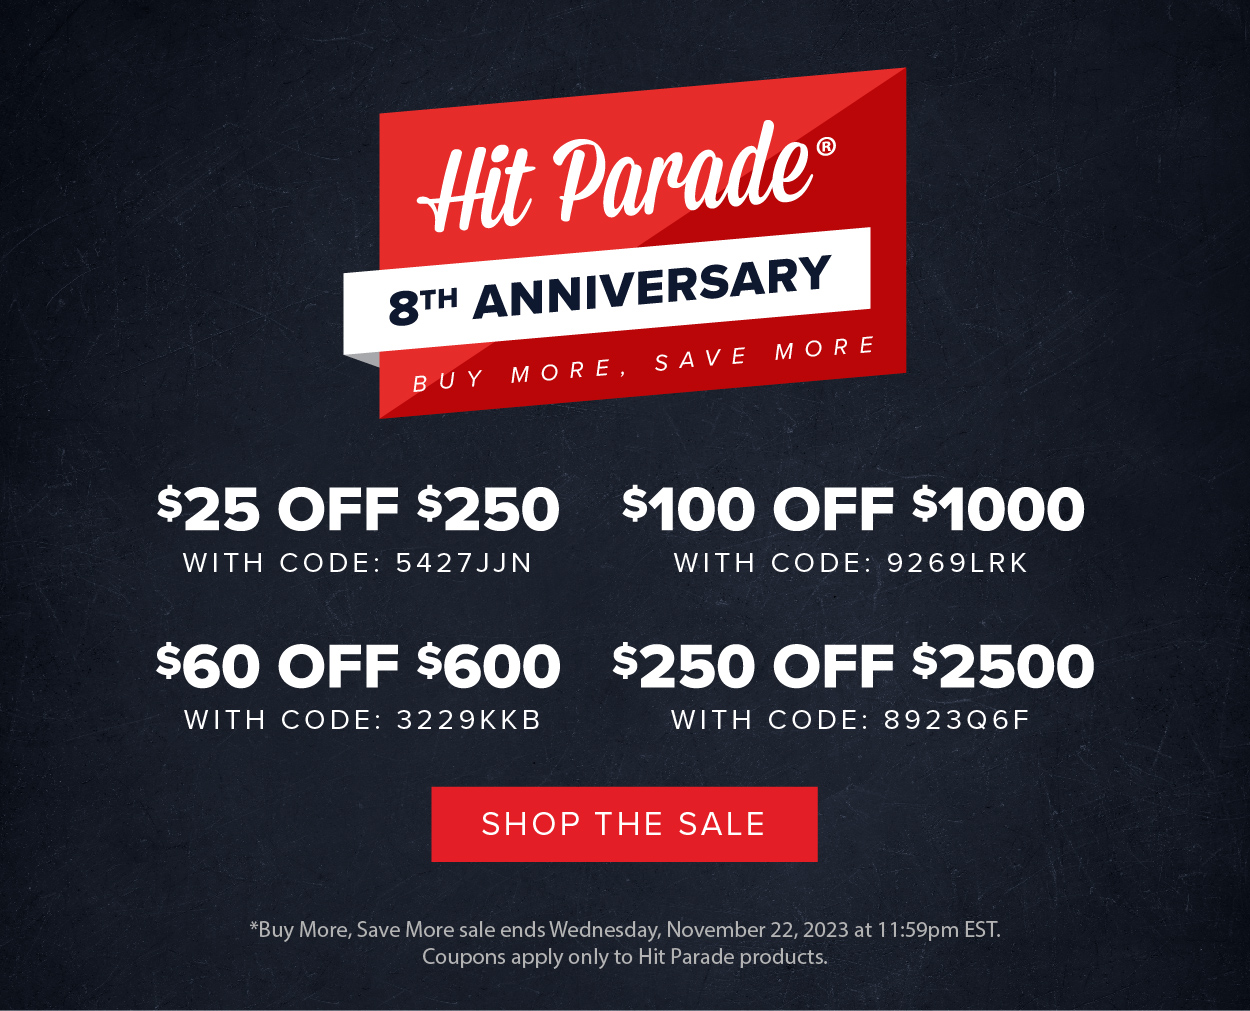 Hit Parade 8th Anniversary Sale | Buy More, Save More